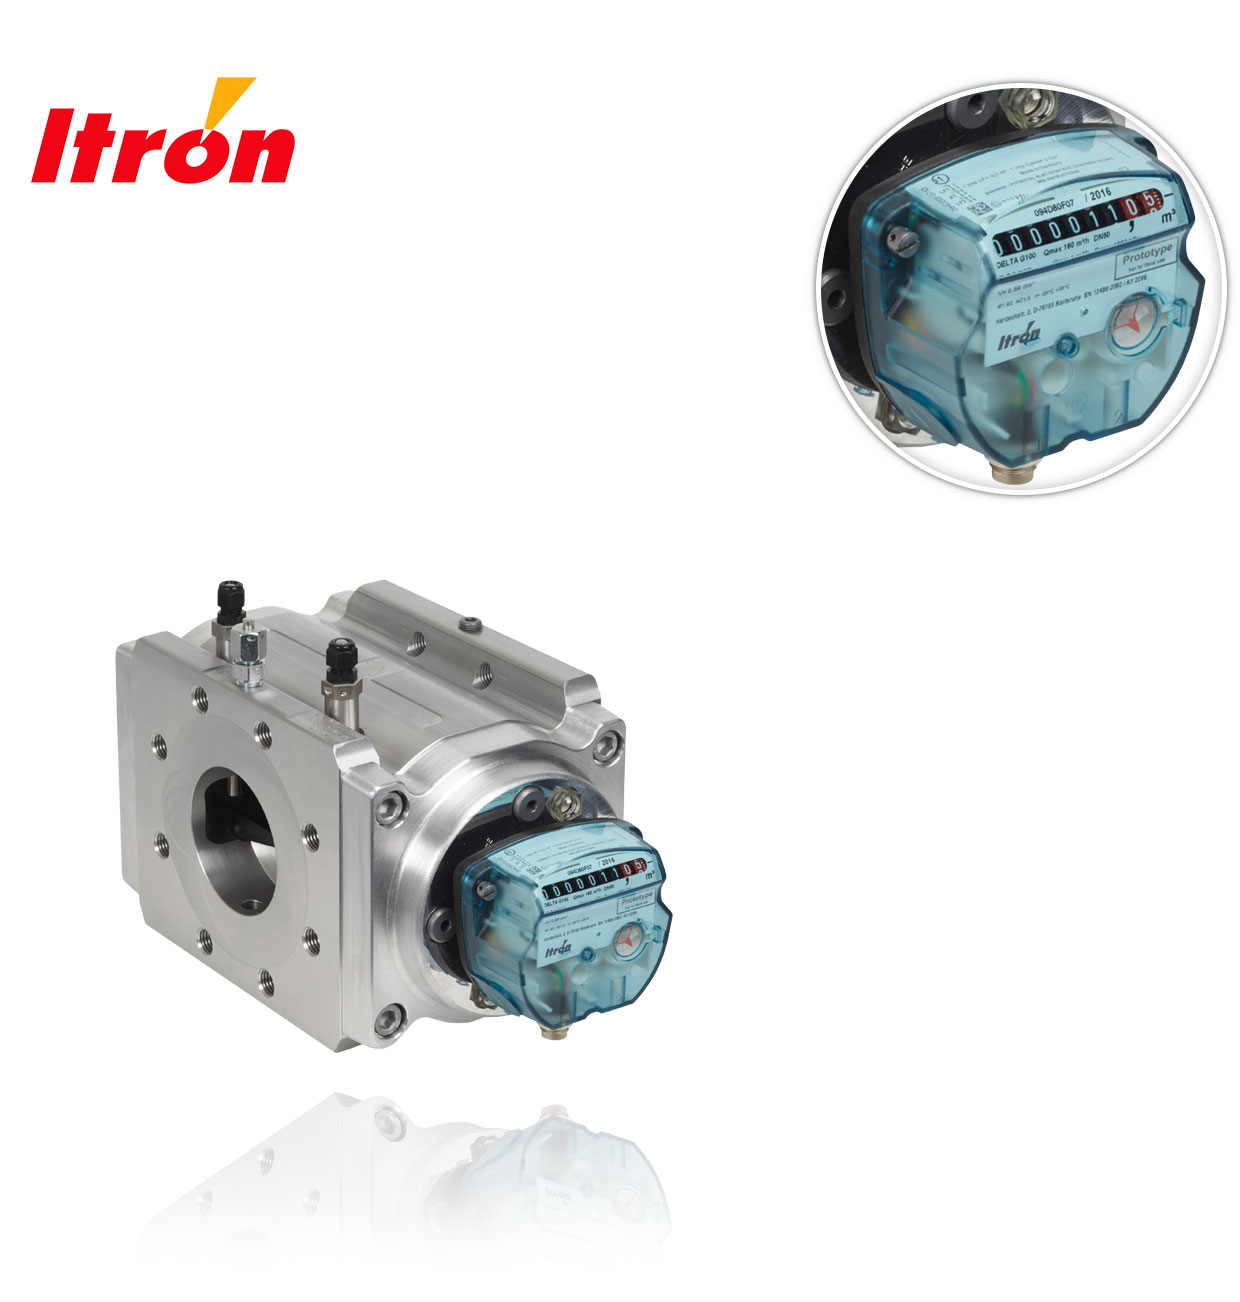 DELTA G65 DN50 maximum qty:100 DYNAMIC:200 LENGTH:171mm ITRON EXTENDED DYNAMIC ROTARY PISTON METER